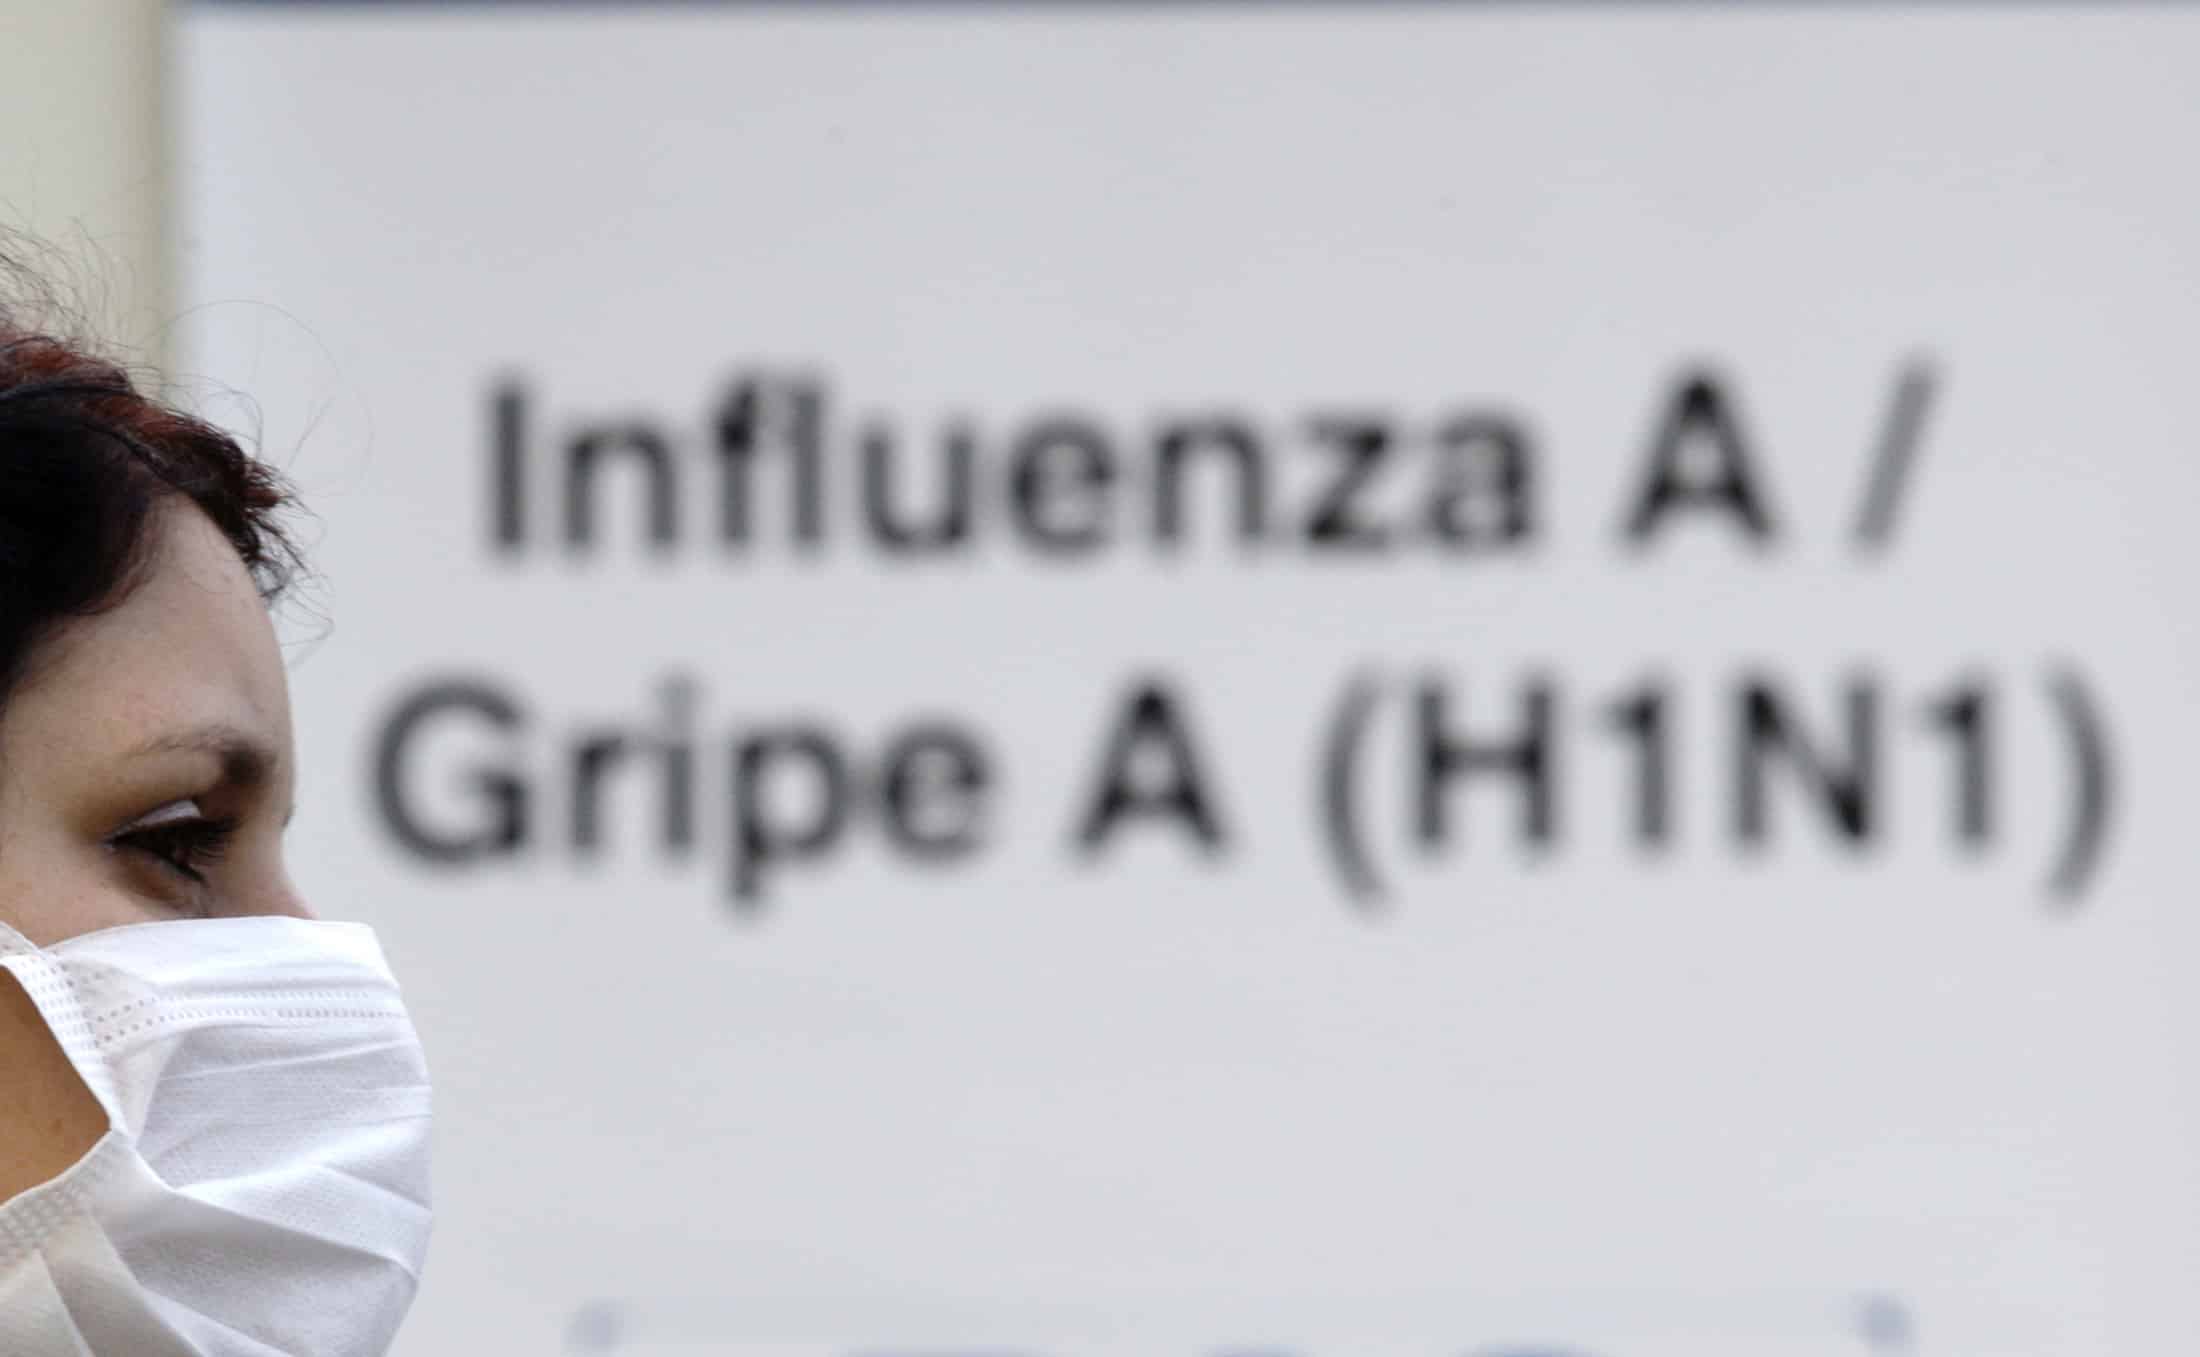 A person with a suspected case of H1N1 influenza virus waits outside Miguel Couto hospital in Rio de Janeiro